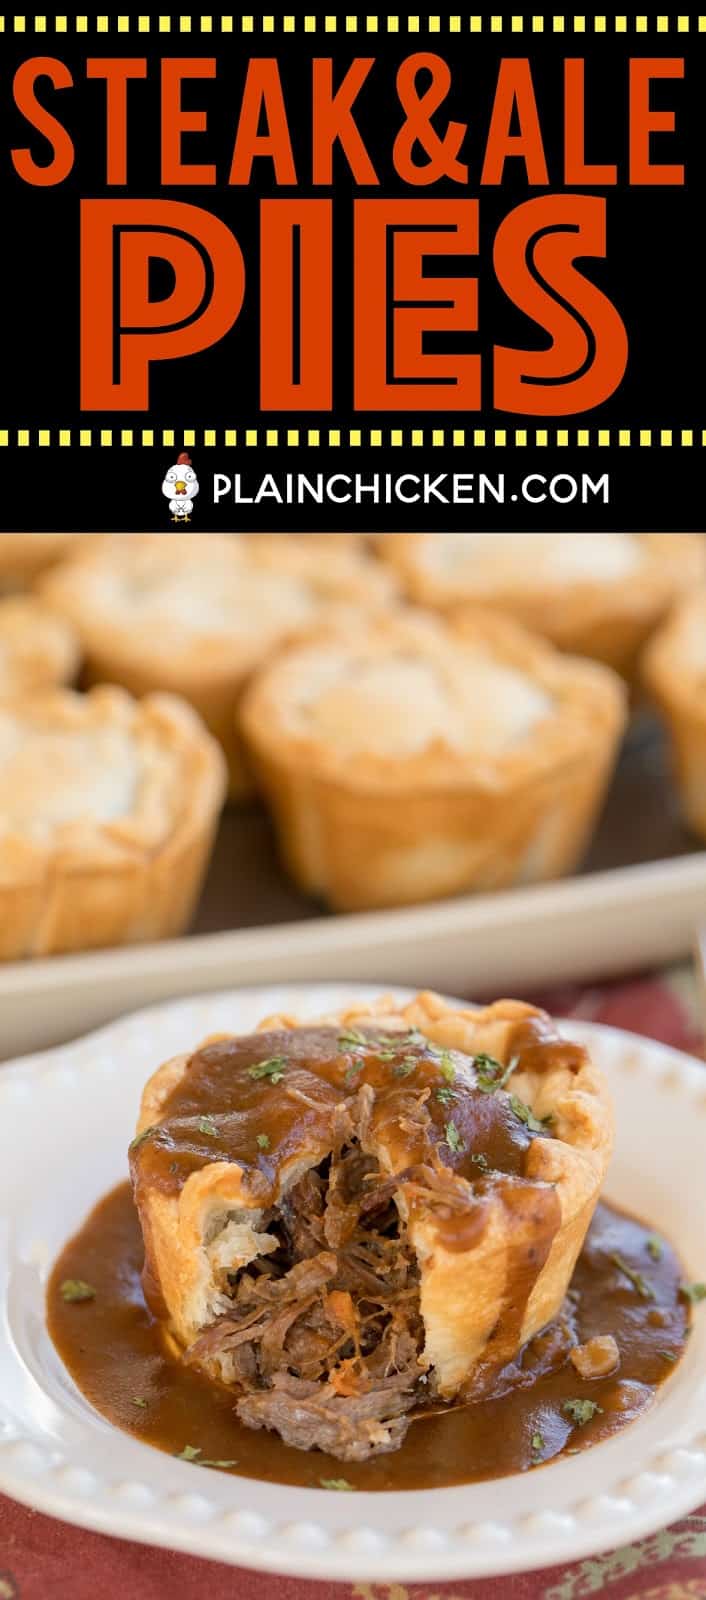 Mini Steak & Ale Pies - Guinness pot roast in pie crust baked in a muffin pan. Inspired by our trip to London, England. These taste better than any of the meat pies we ate in the London pubs. YUM! Slow cooked pot roast, pie crust and Guinness gravy. Can make ahead and freeze for a quick meal later! #london #guinness #steak #meatpie